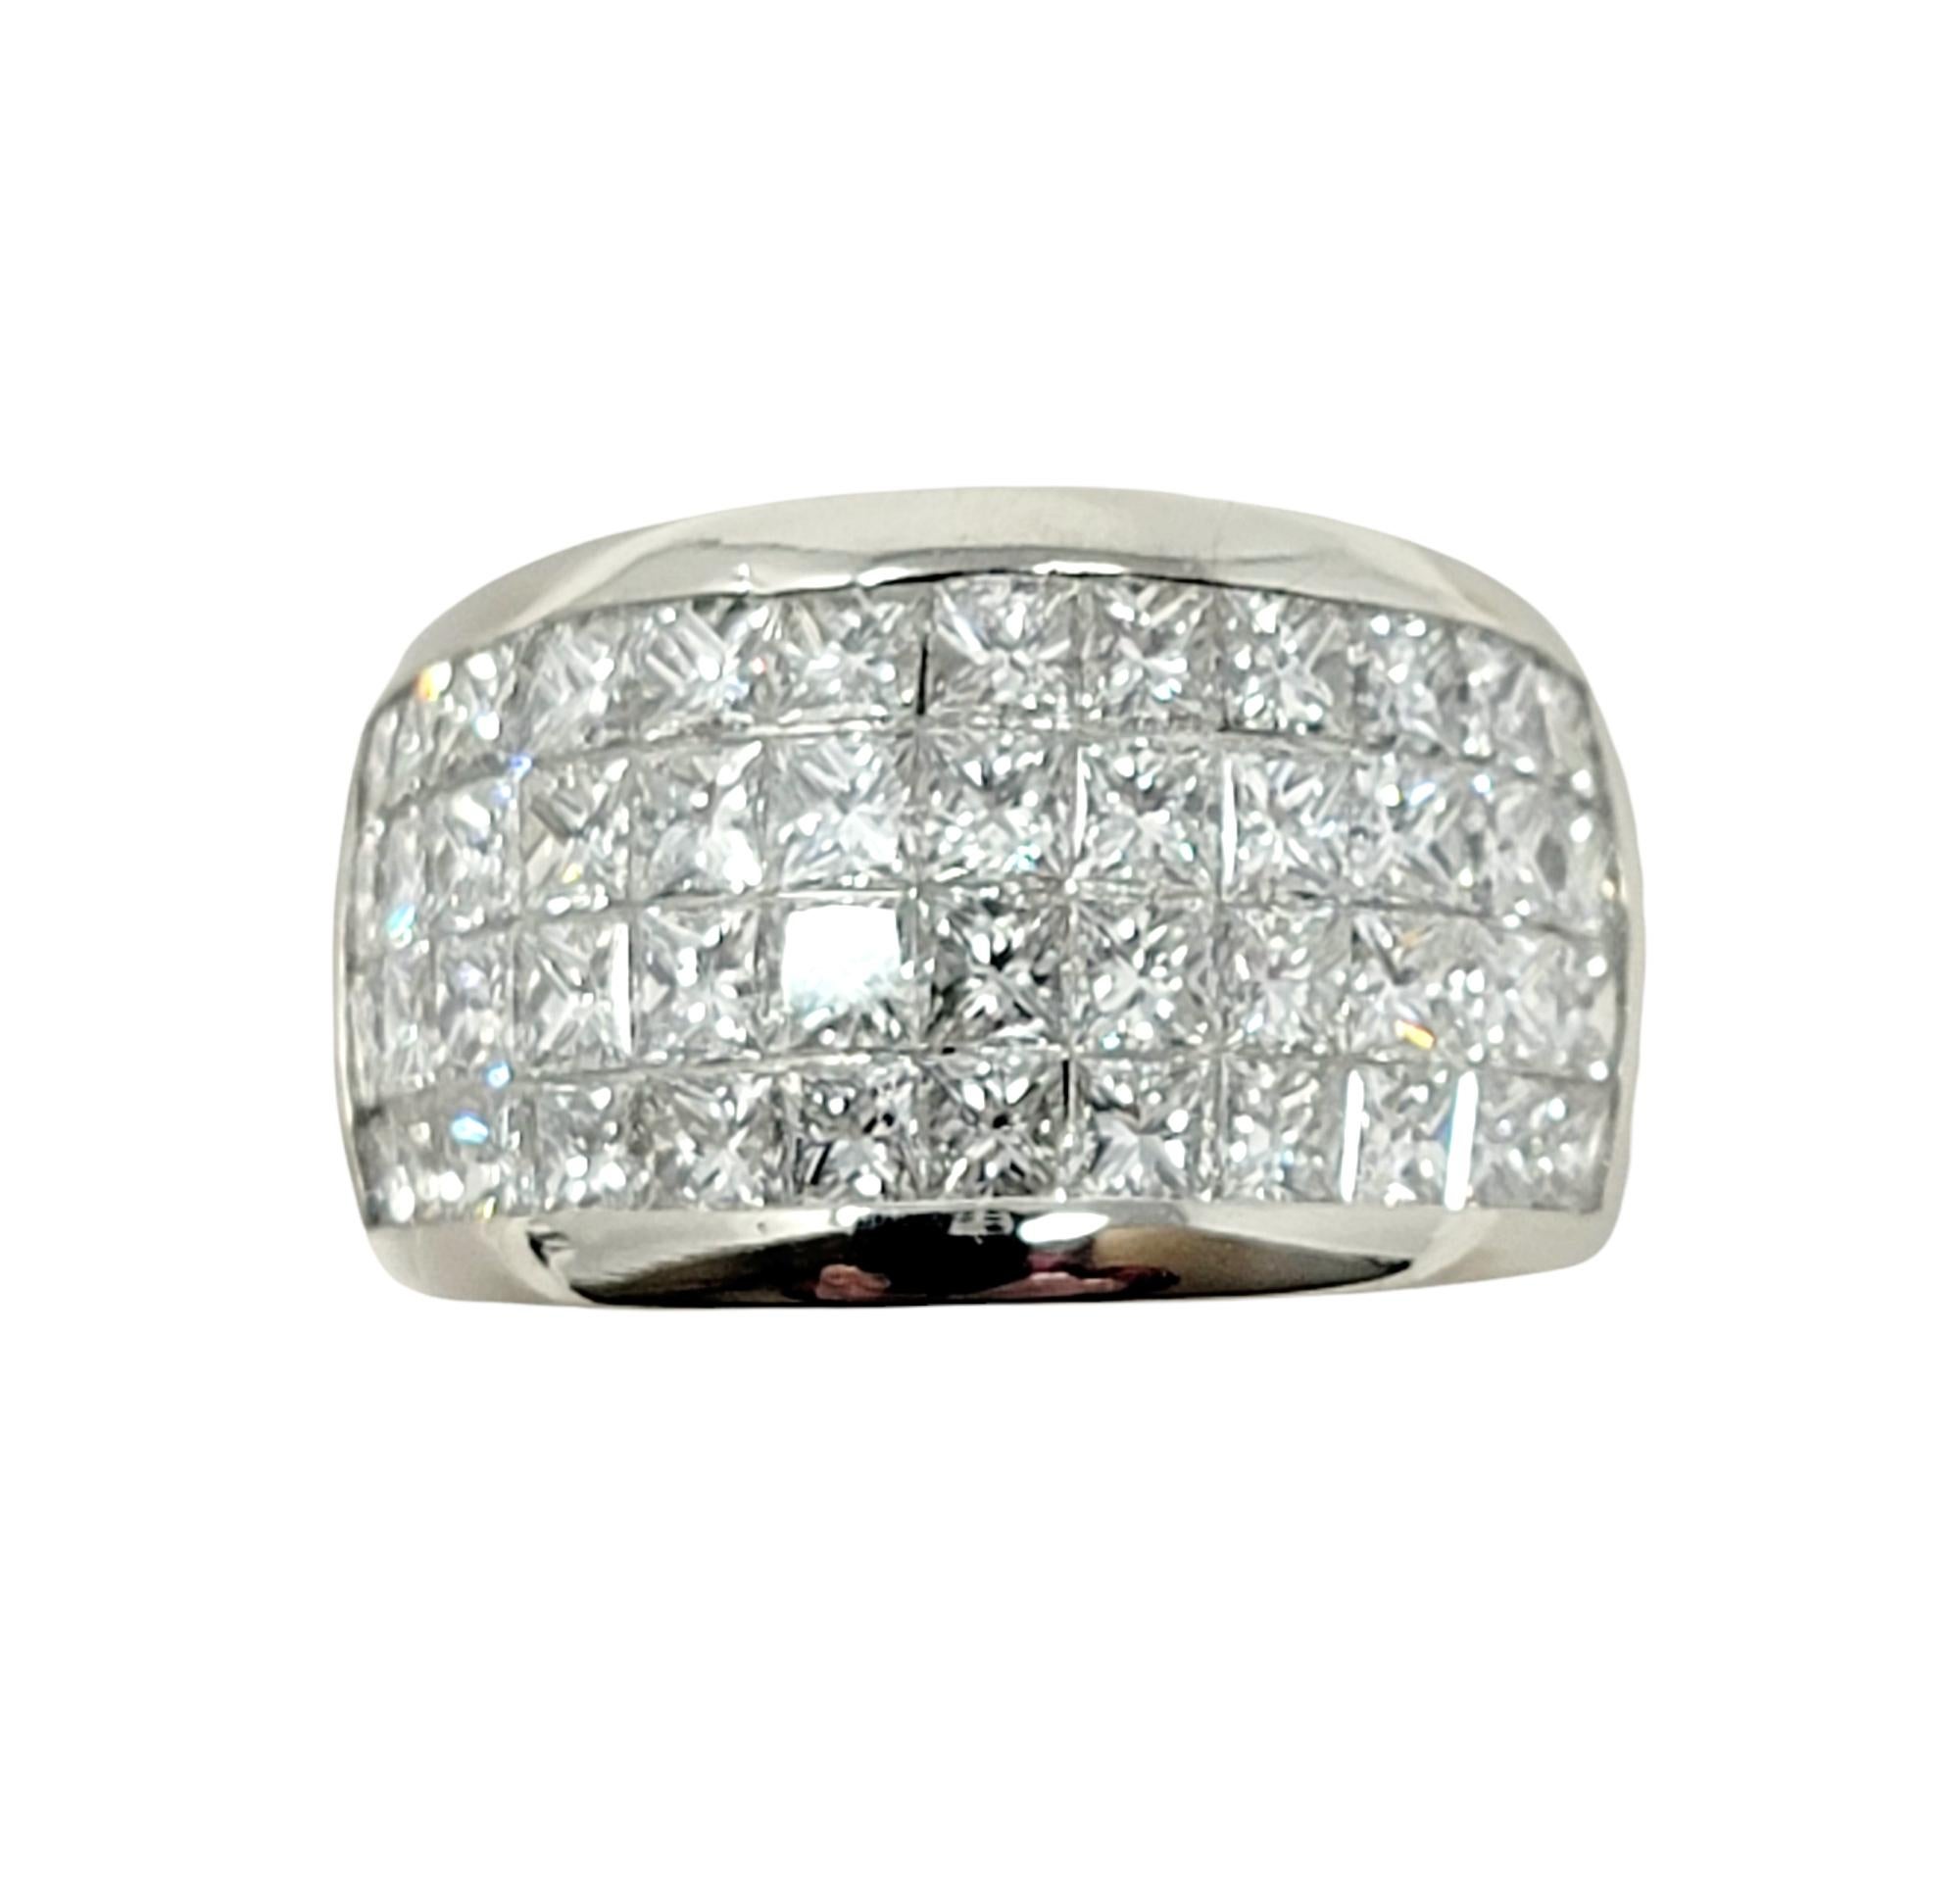 Ring size: 5

This stunning diamond cocktail ring wraps elegantly around the finger and fills it with sparkle from end to end. Featuring a contemporary wide band design, this ring is smooth, sleek, and sophisticated. The closely set natural stones